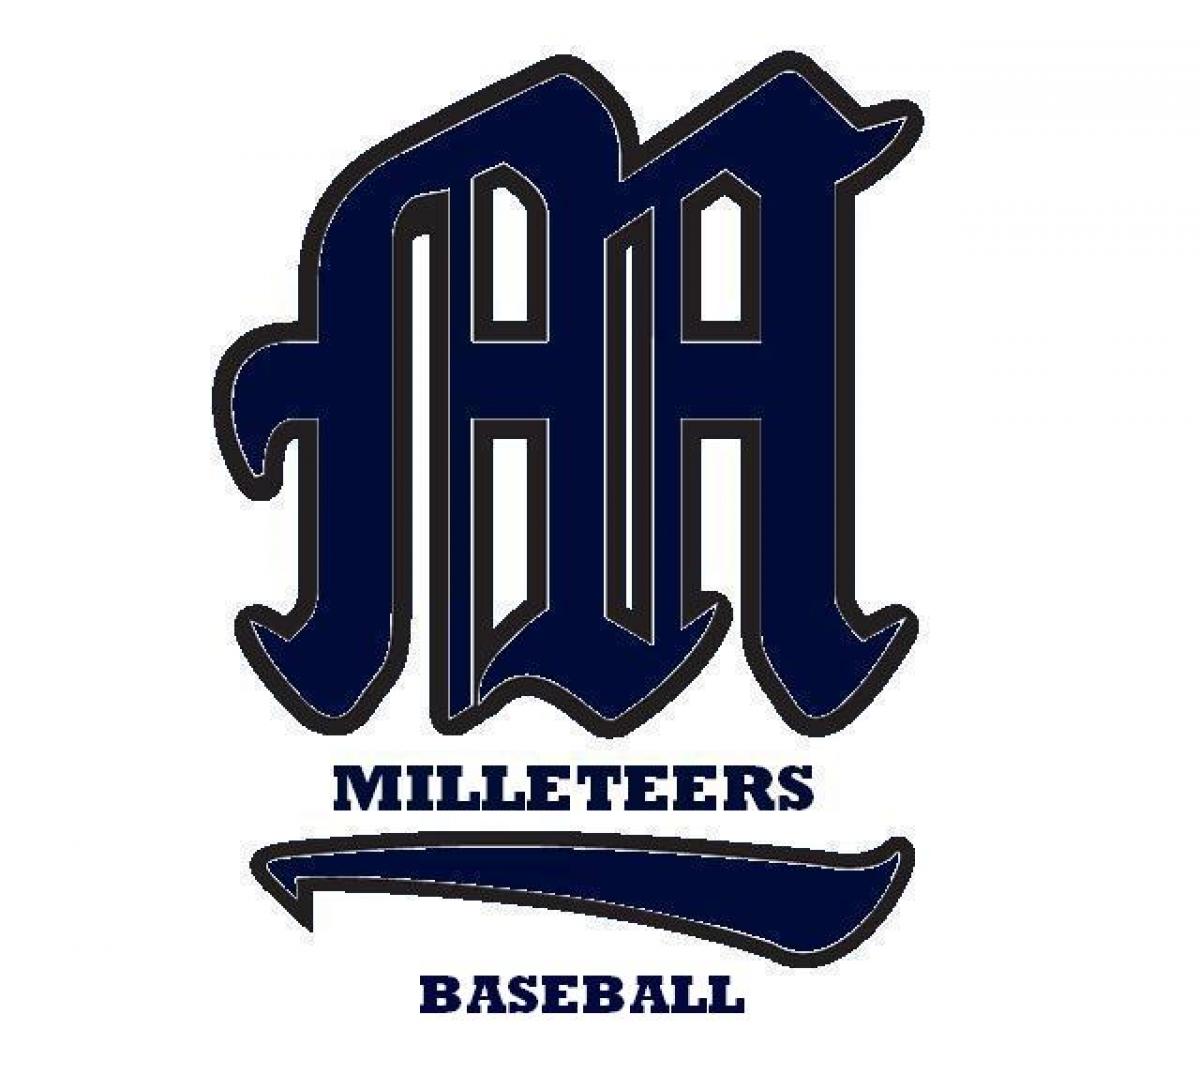 Milleteers Hold On In Holden